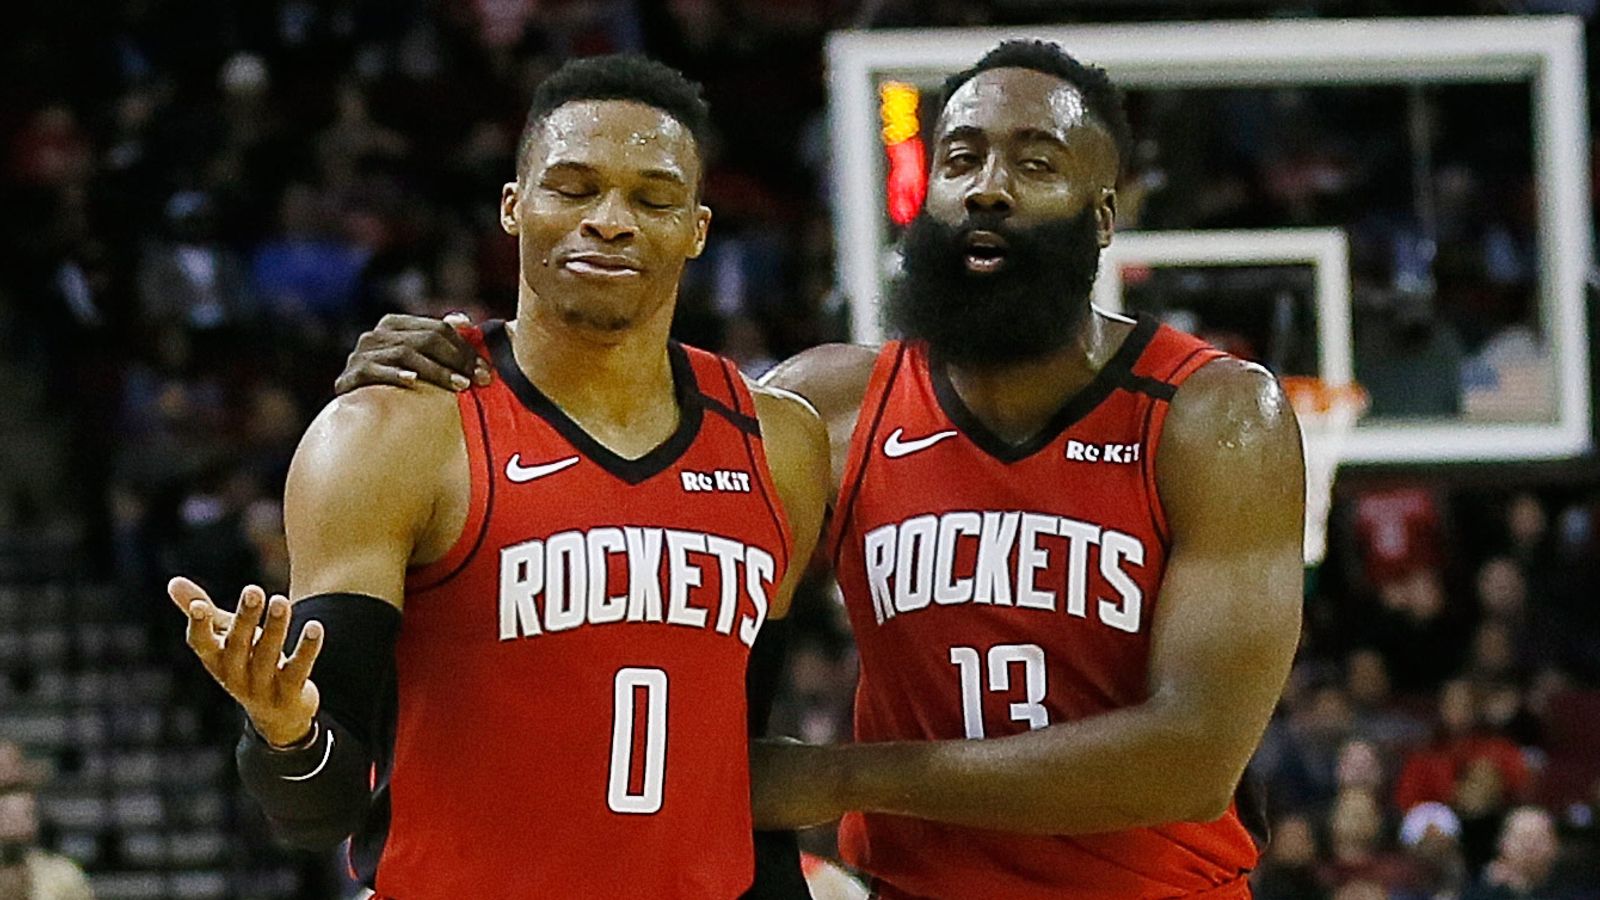 Houston Rockets' new 'micro-ball' style analysed – how it works; pros